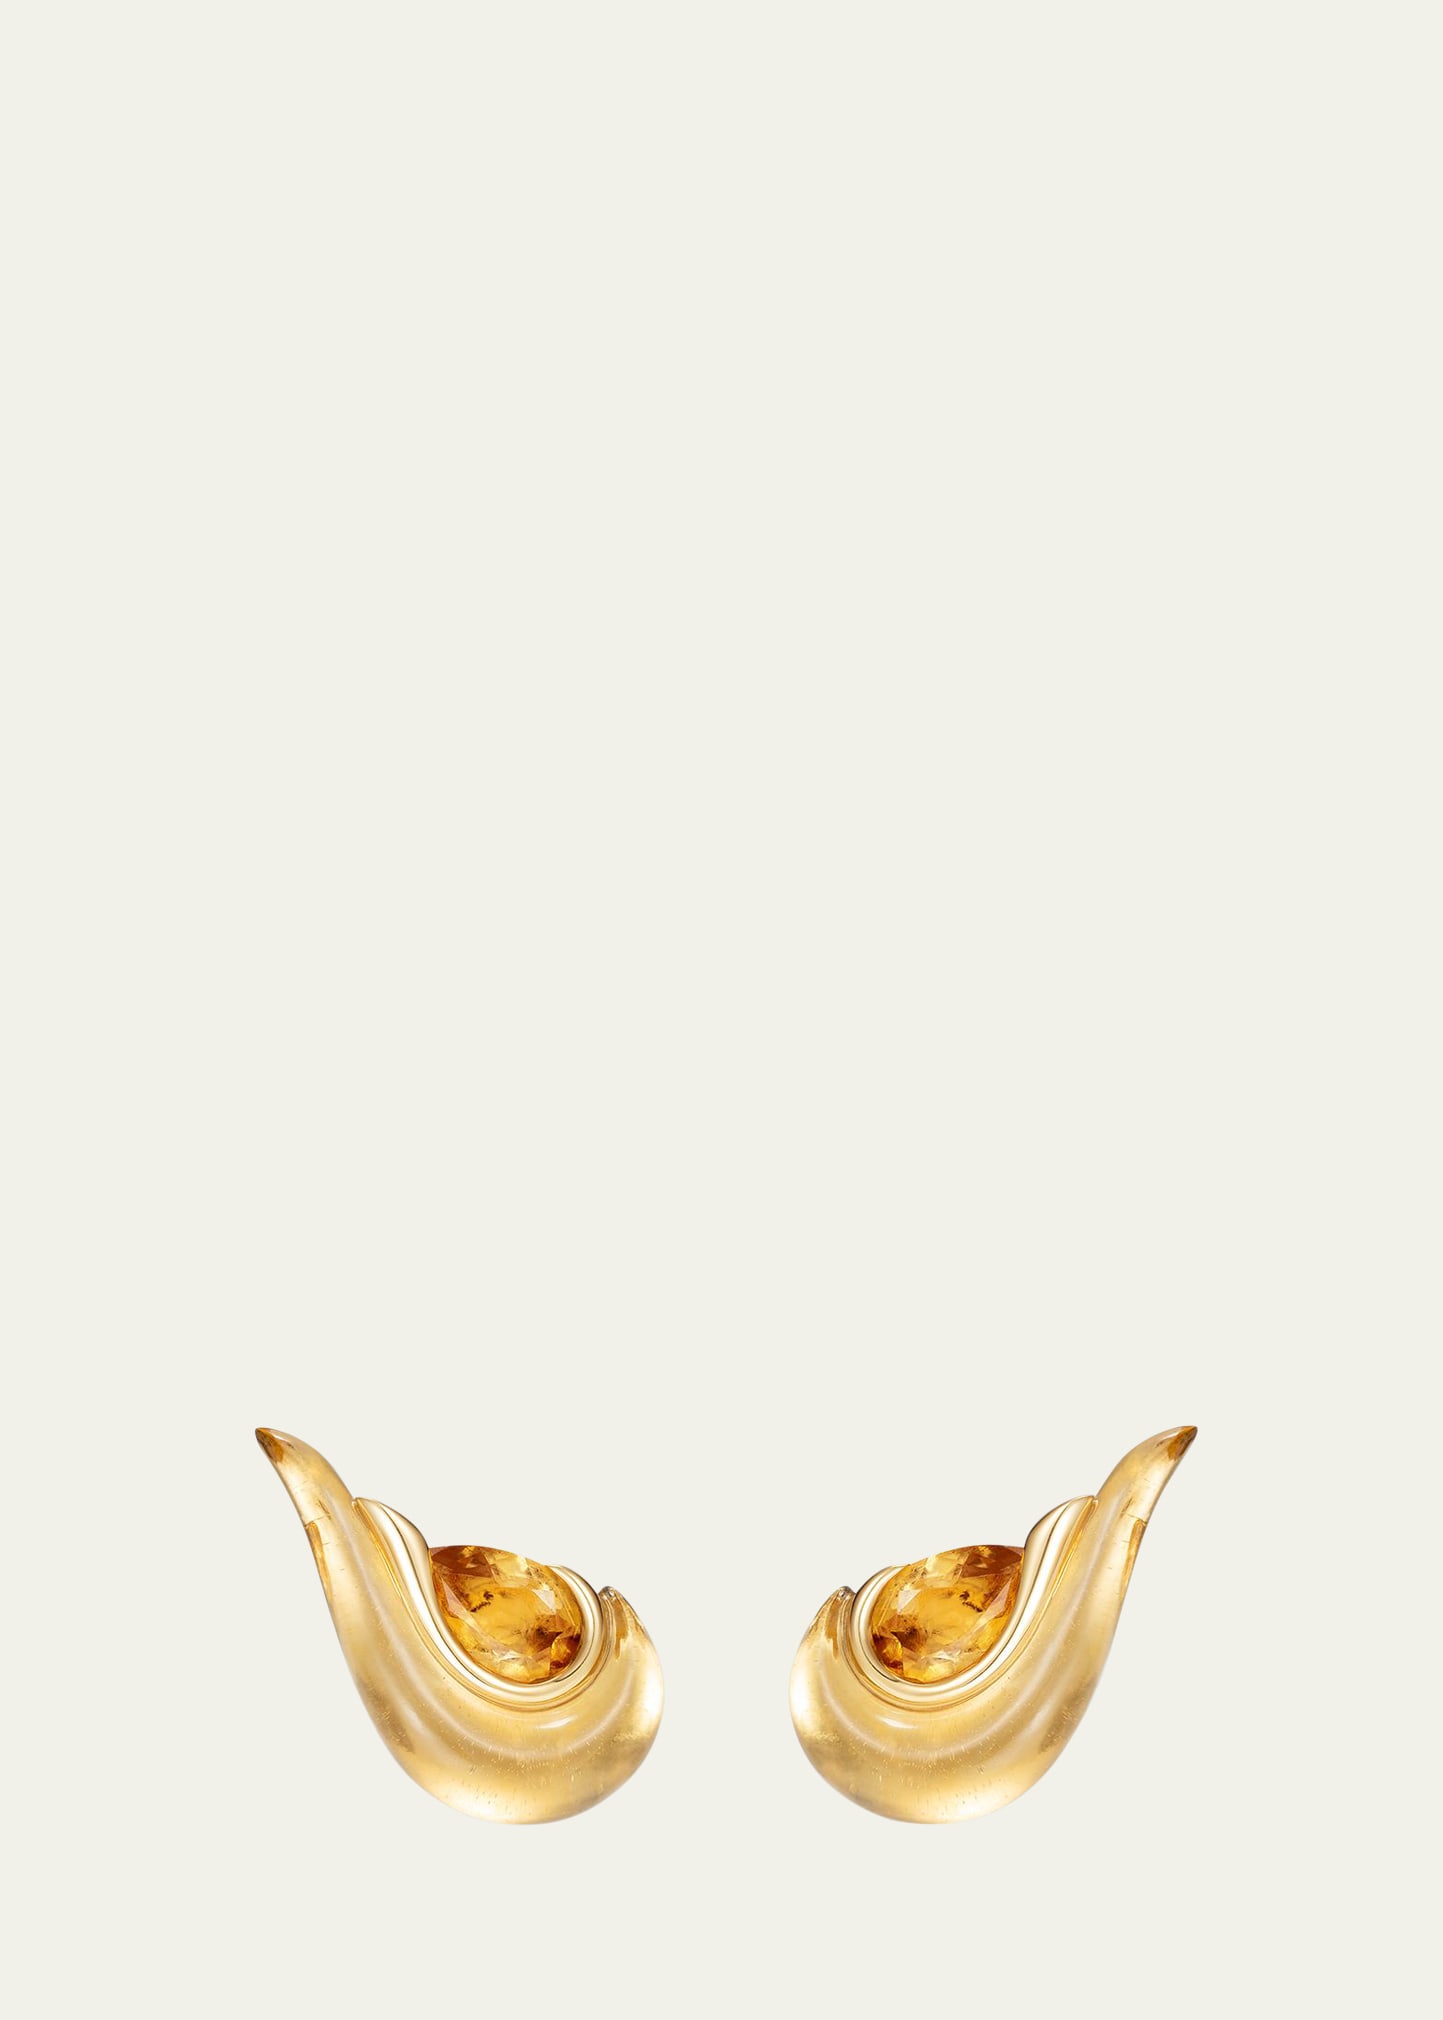 Gleam Stud Earrings in 18k Yellow Gold and Citrine